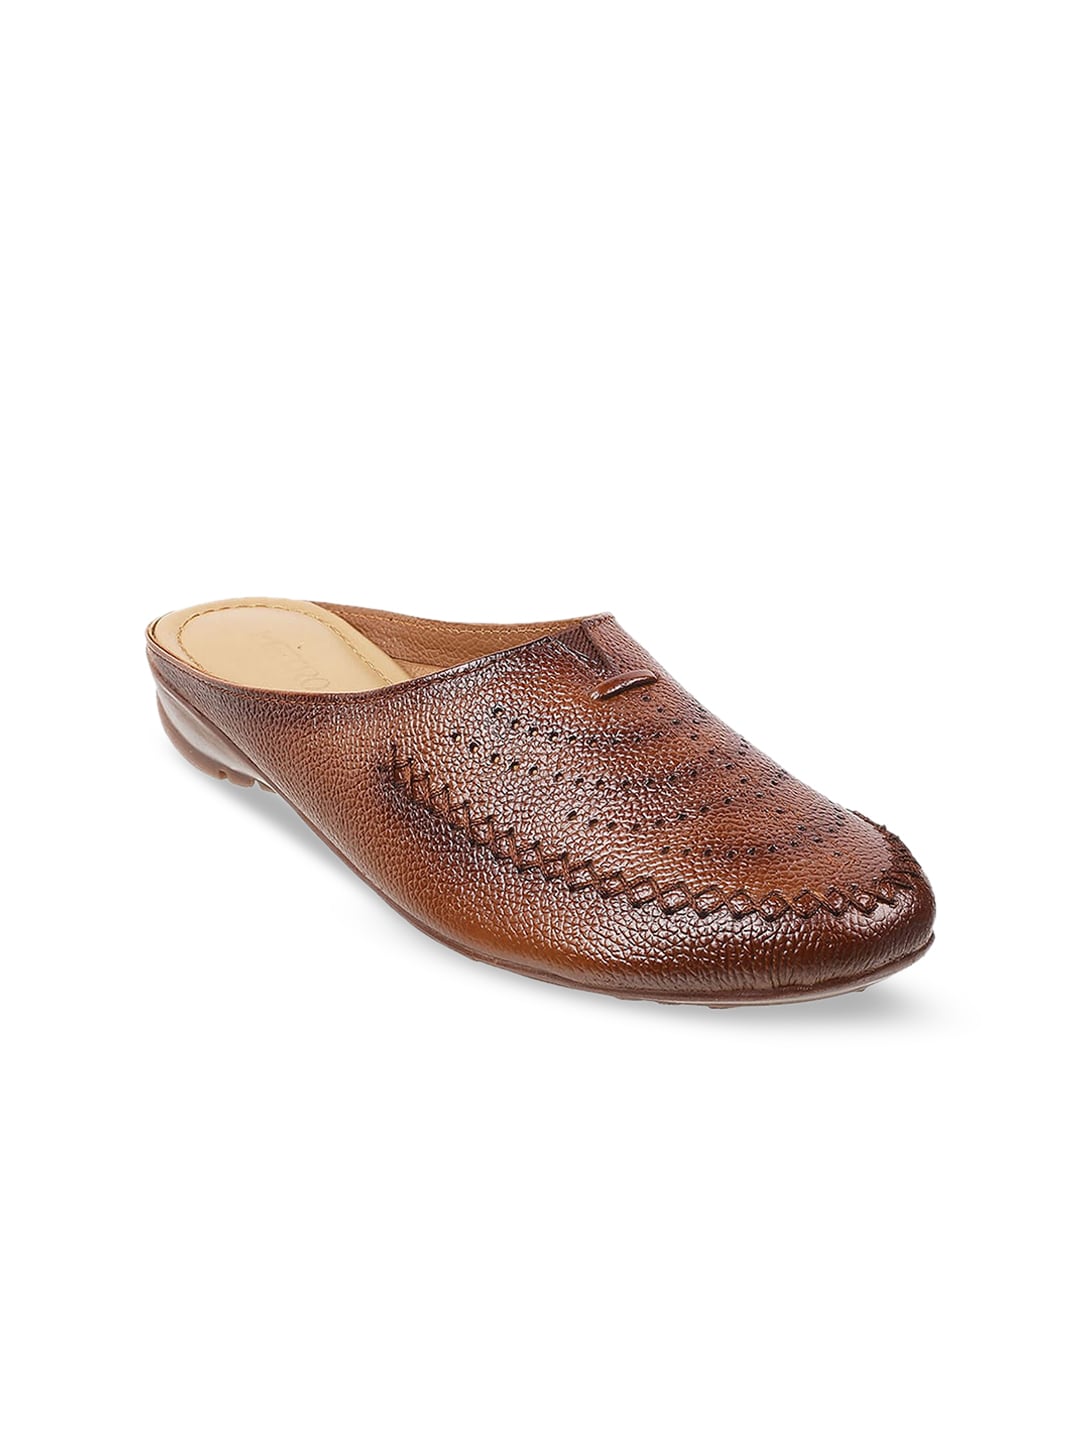 Metro Women Rust Textured Leather Mules with Laser Cuts Flats Price in India